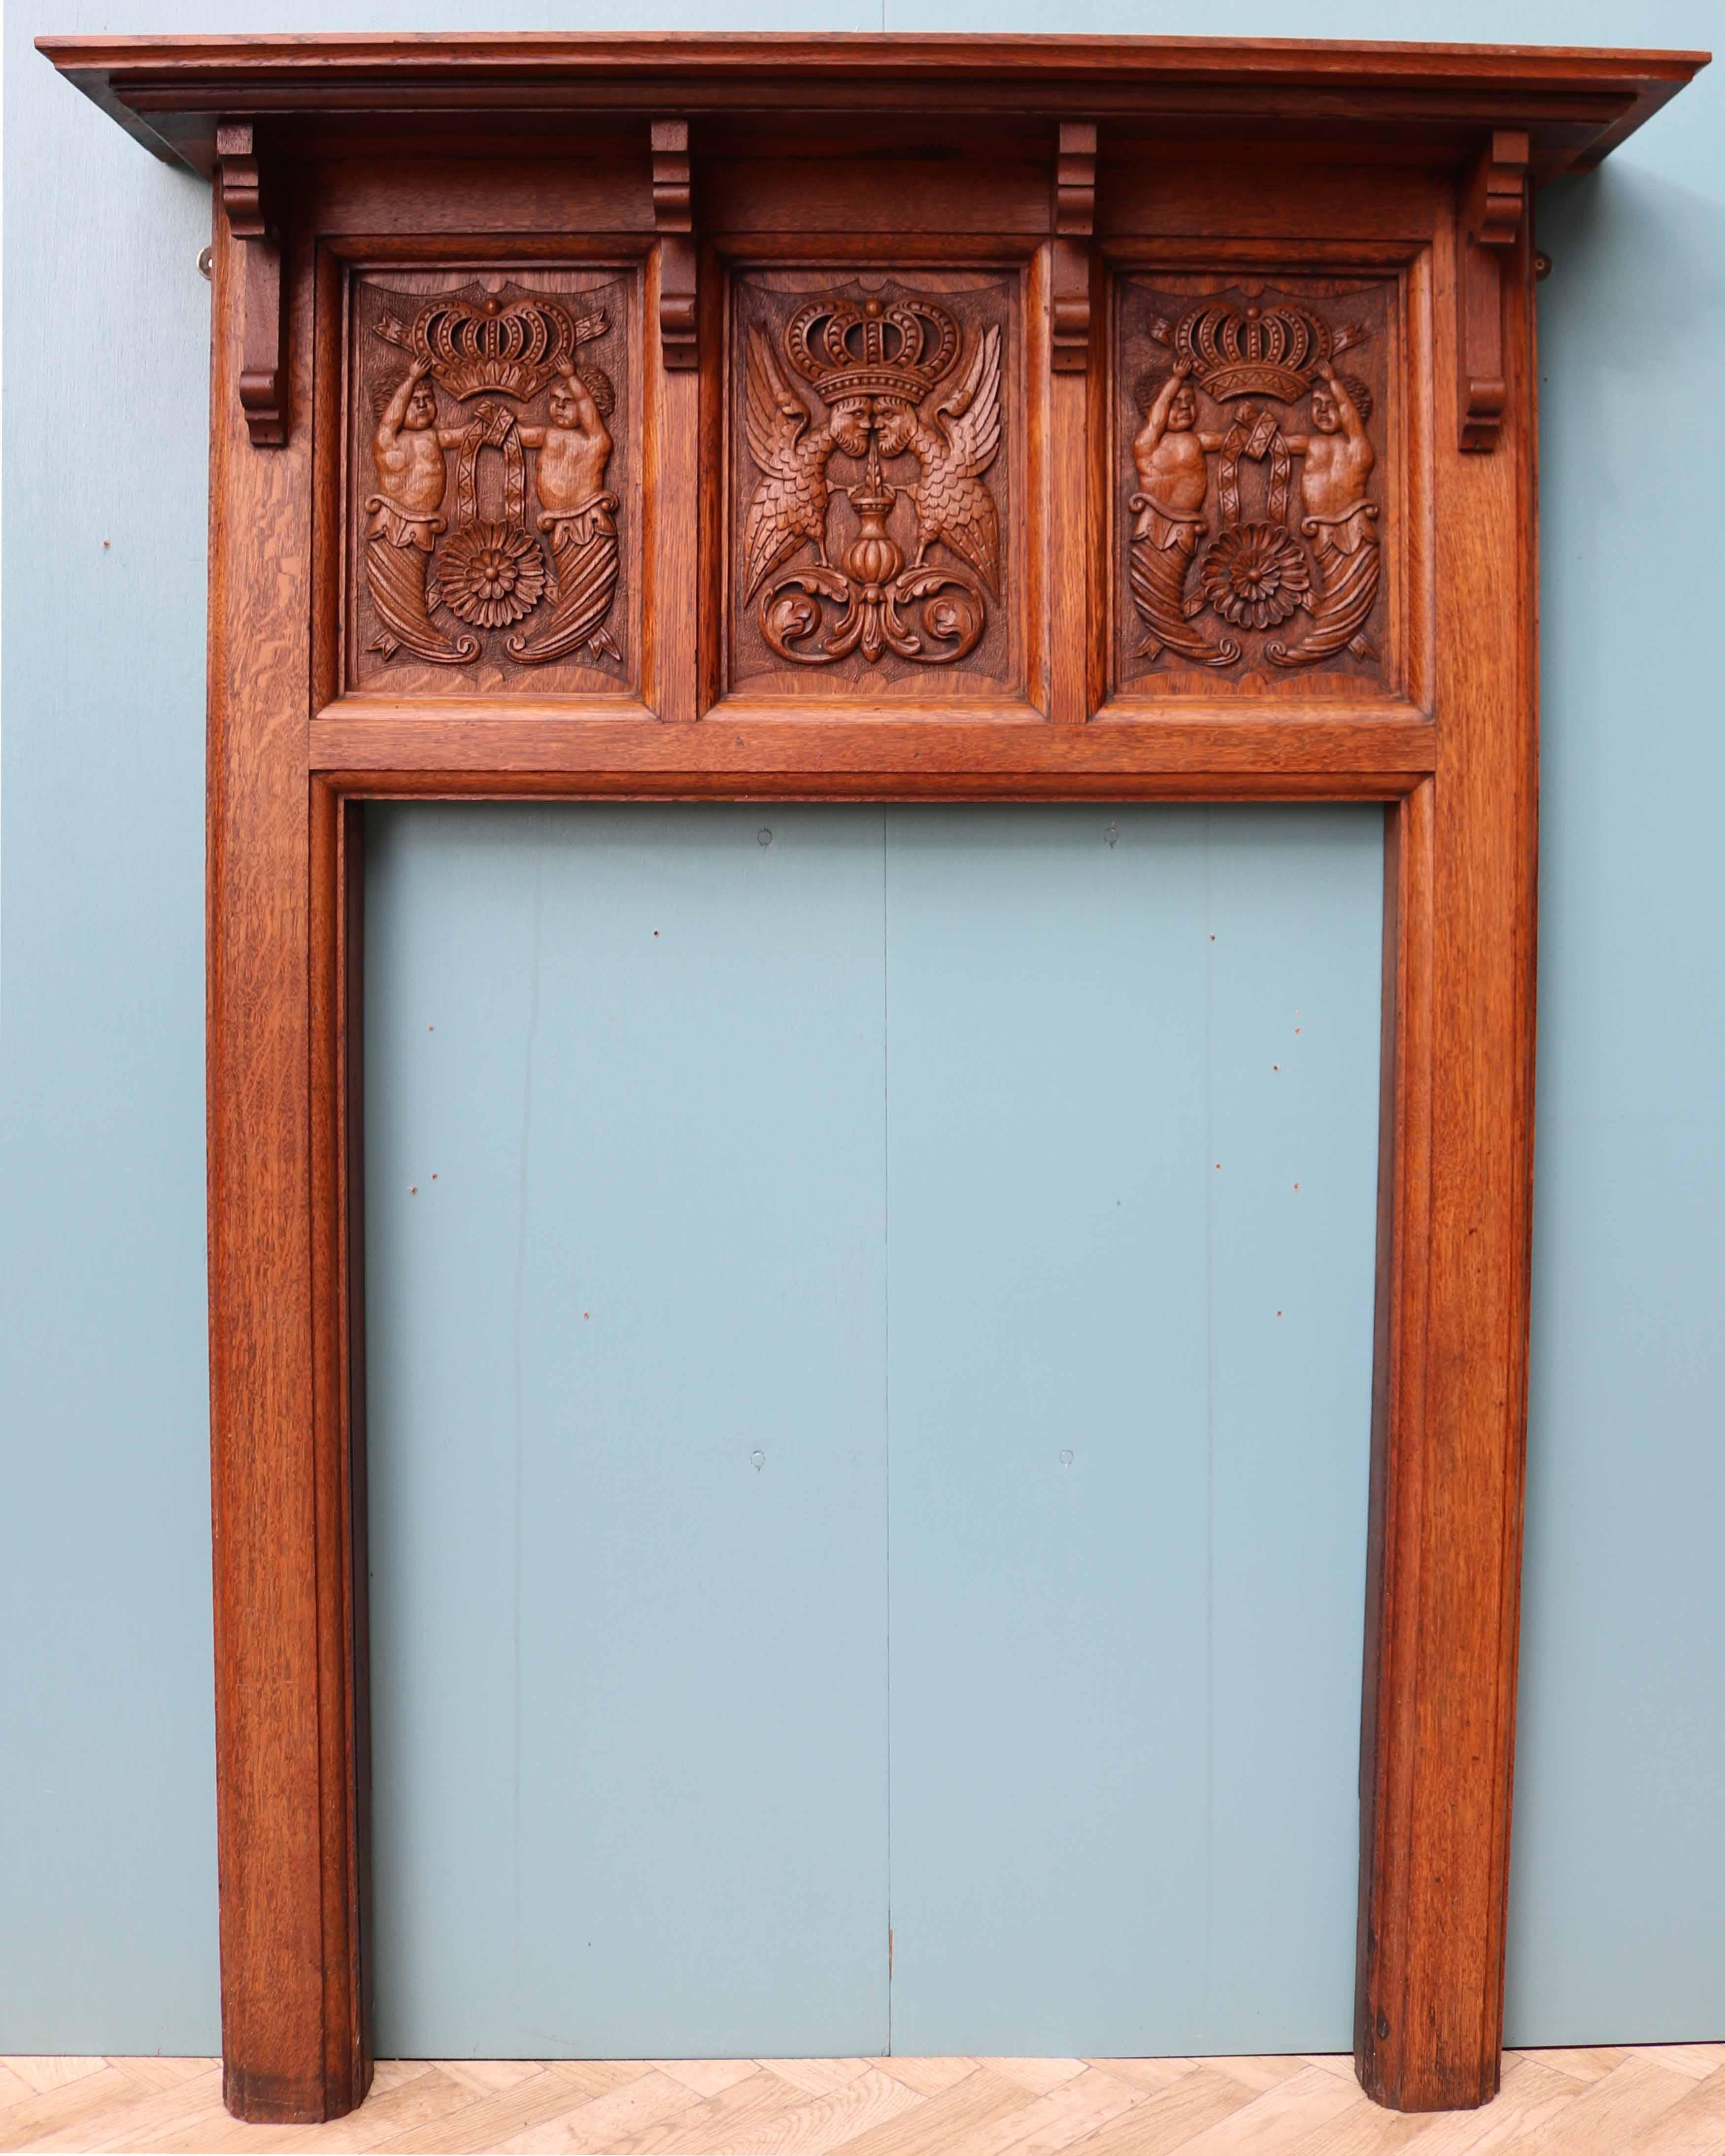 A good quality oak fire surround featuring three hand carved panels to the frieze. Reclaimed from a large private home in Hampshire, UK.

Opening Height 97 cm (38.18 in)
Opening Width 76 cm (29.92 in)
Width between outside of legs 95 cm (37.40